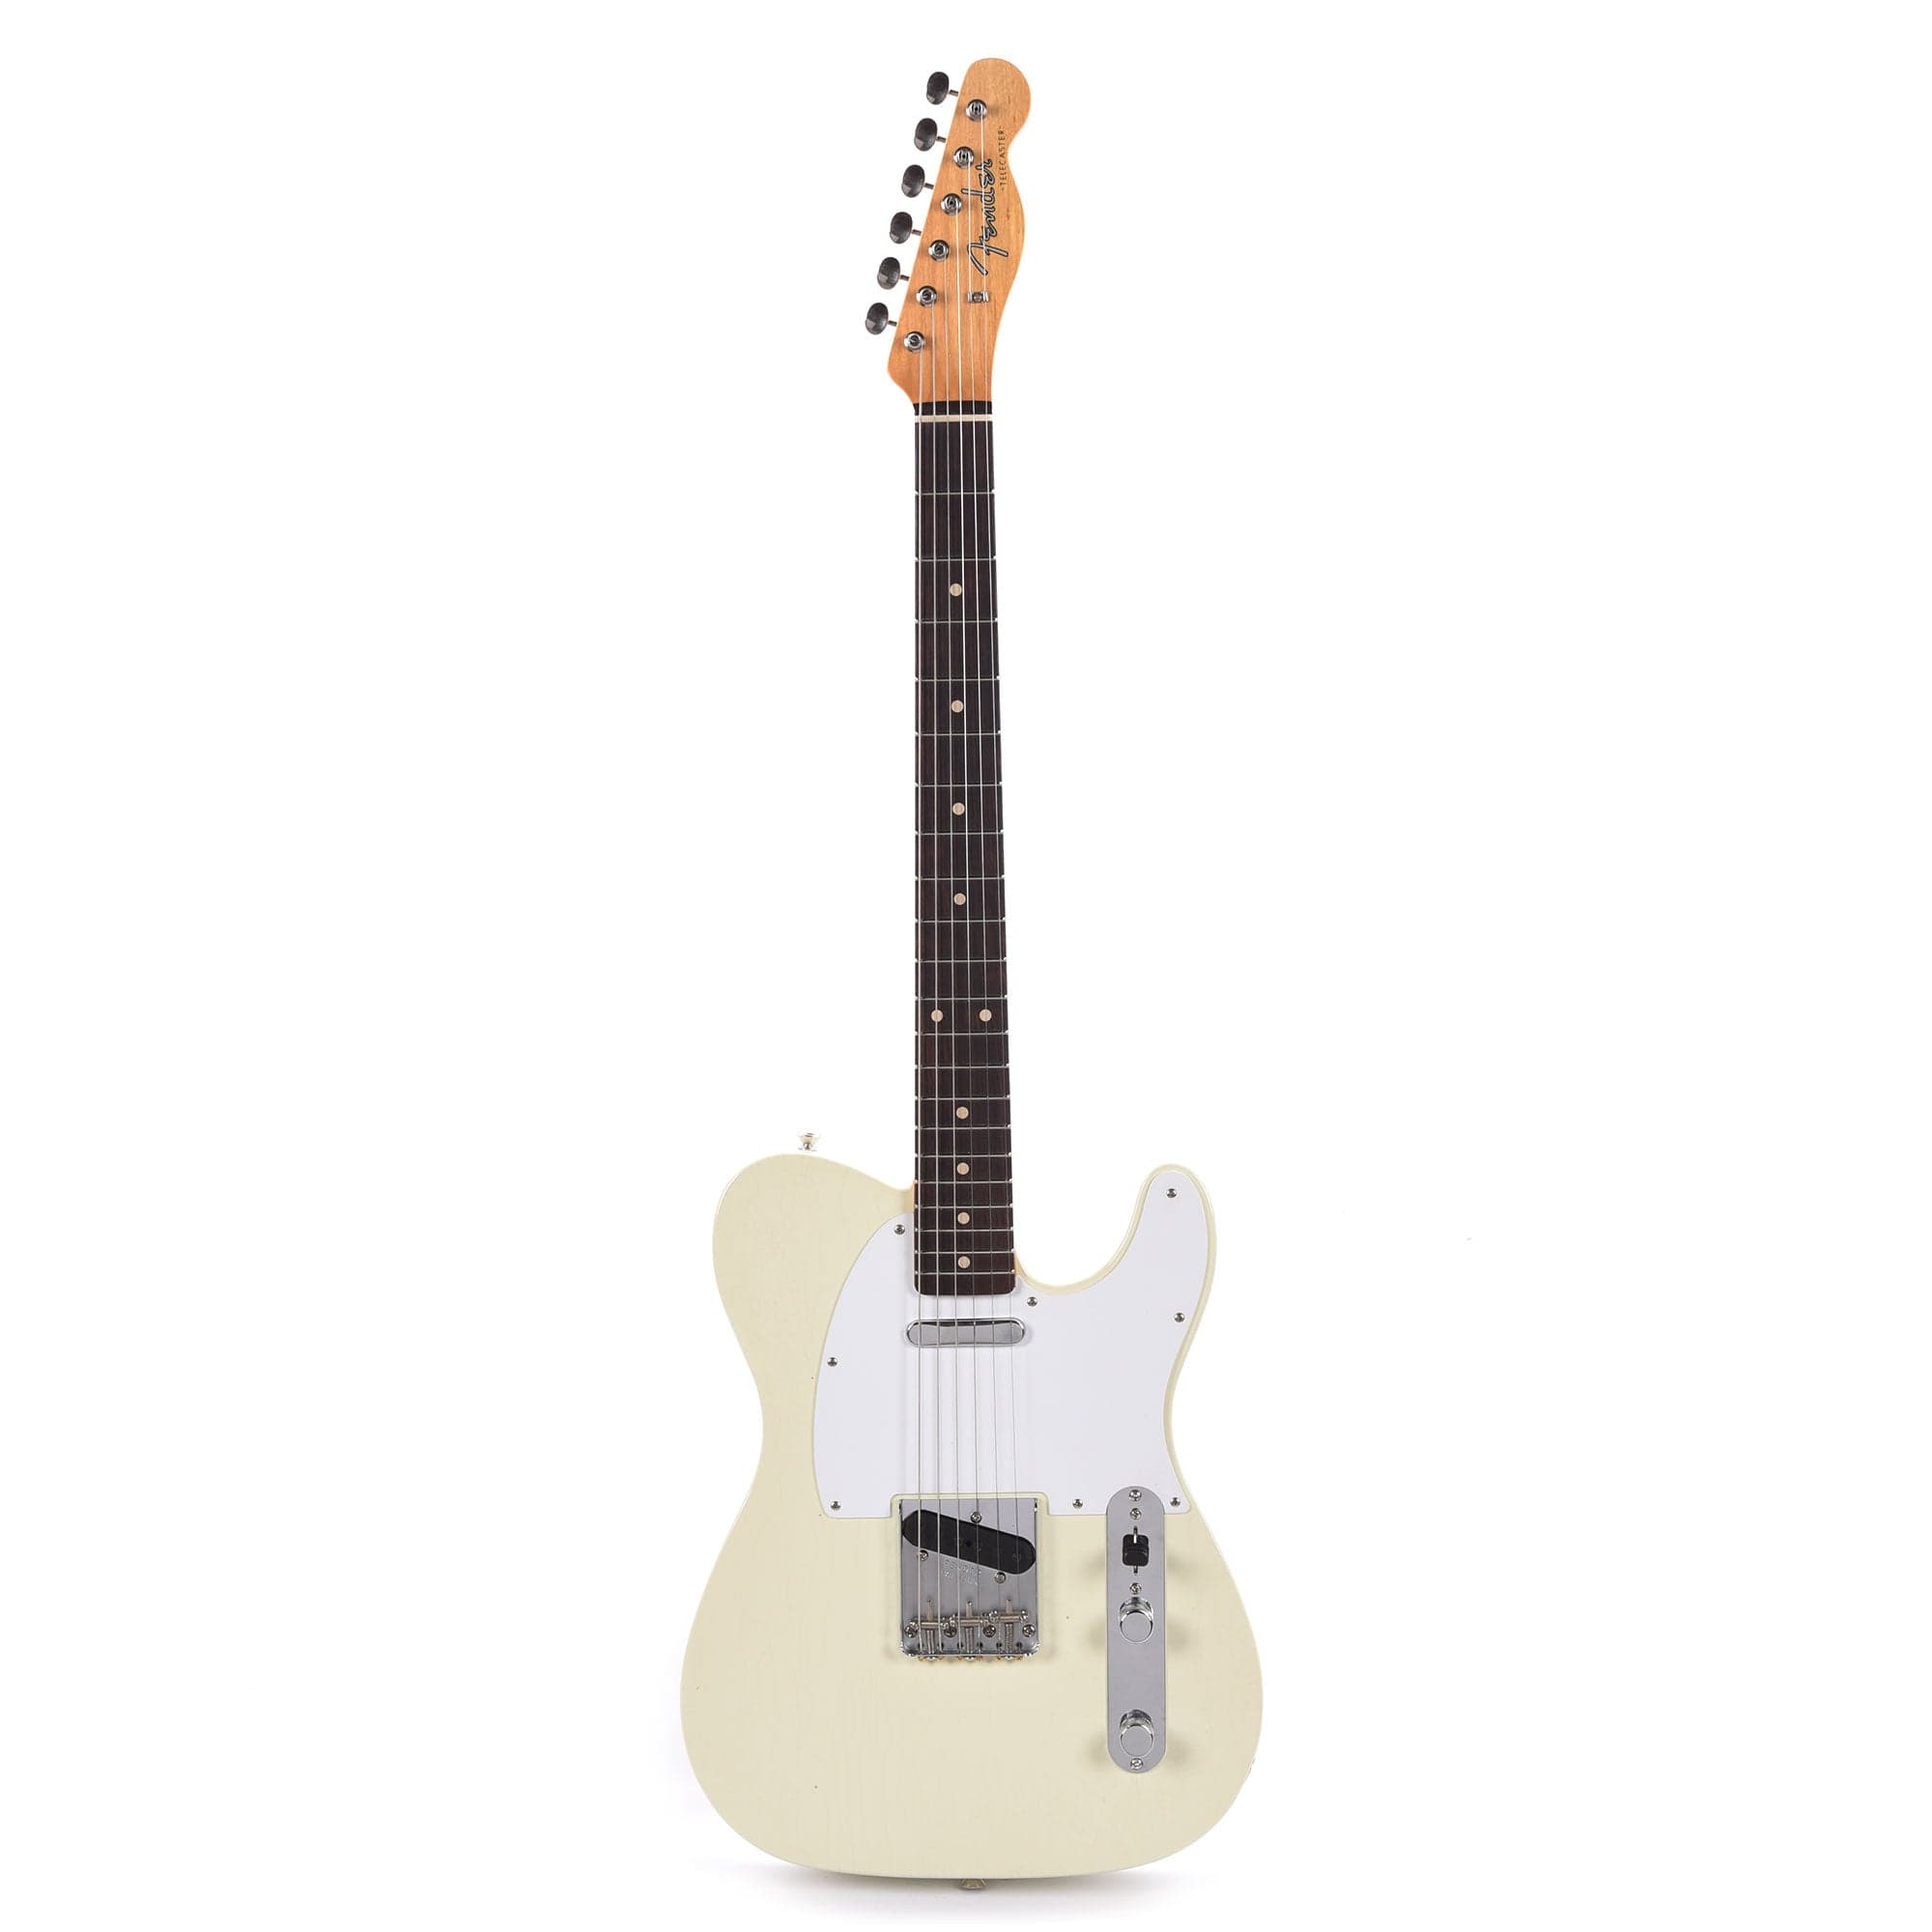 Fender Custom Shop Artist Jimmy Page Signature Telecaster Journeyman Relic White Blonde Electric Guitars / Solid Body